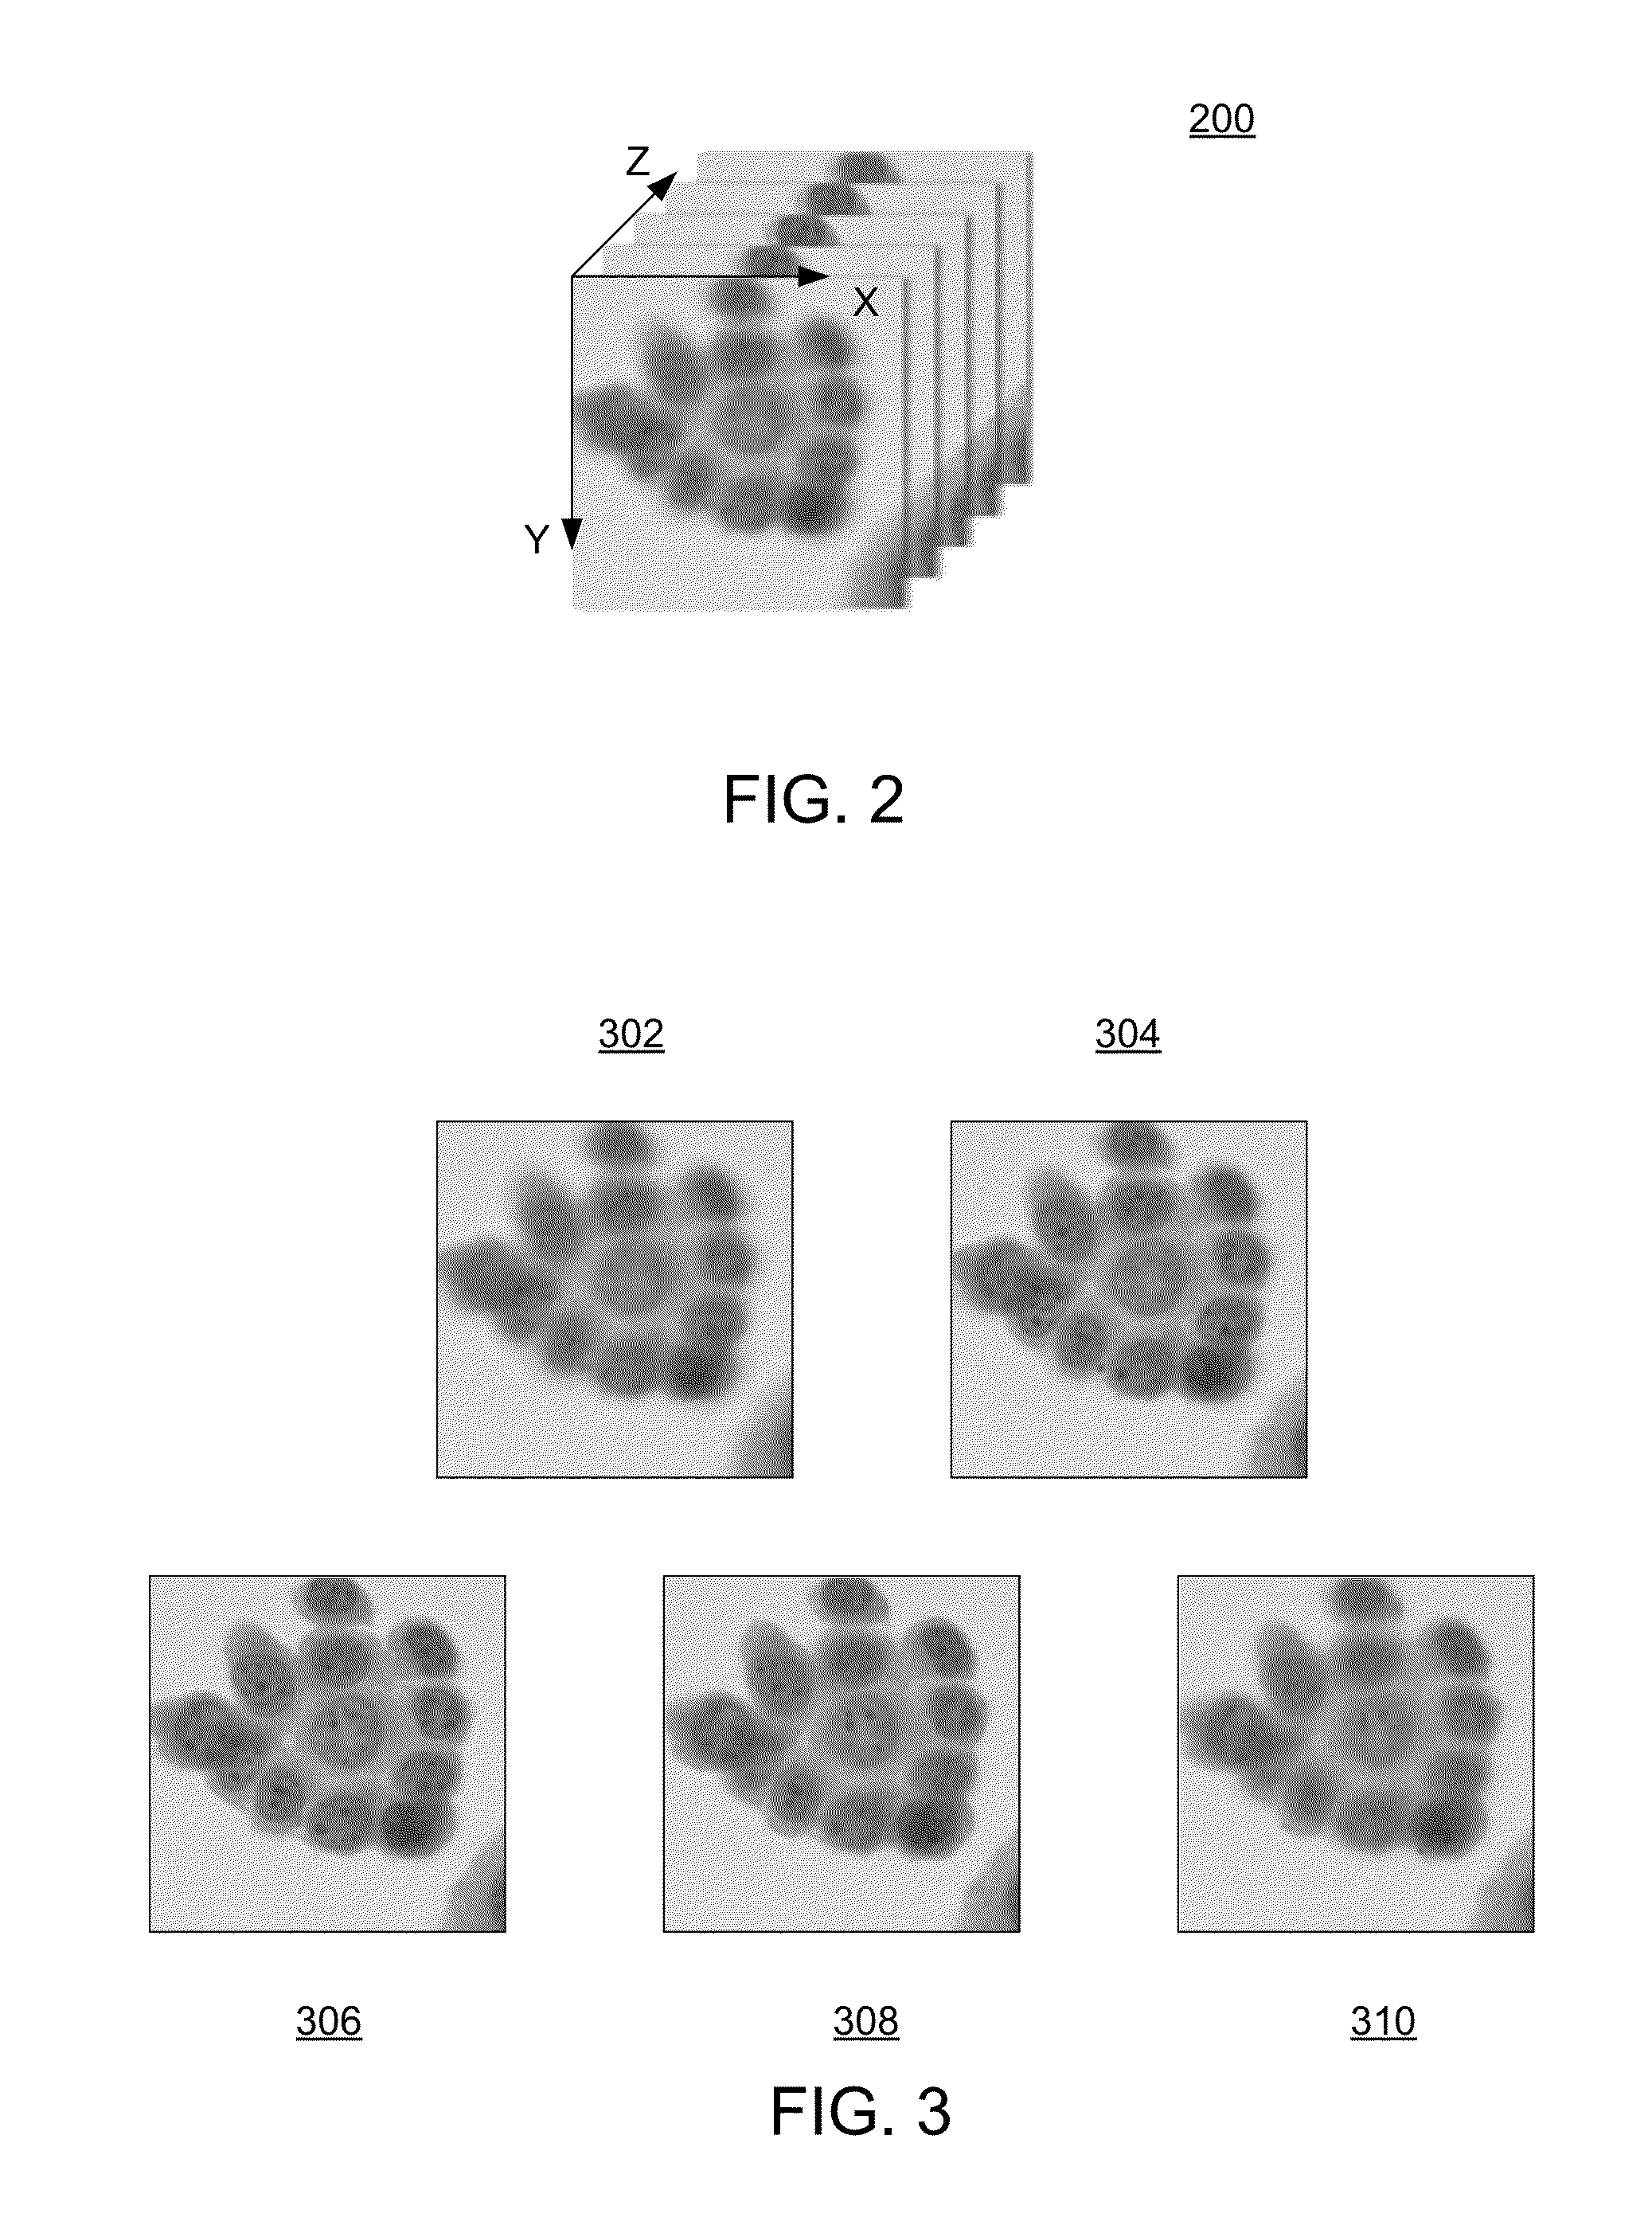 Method and apparatus for improving depth of field (DOF) in microscopy